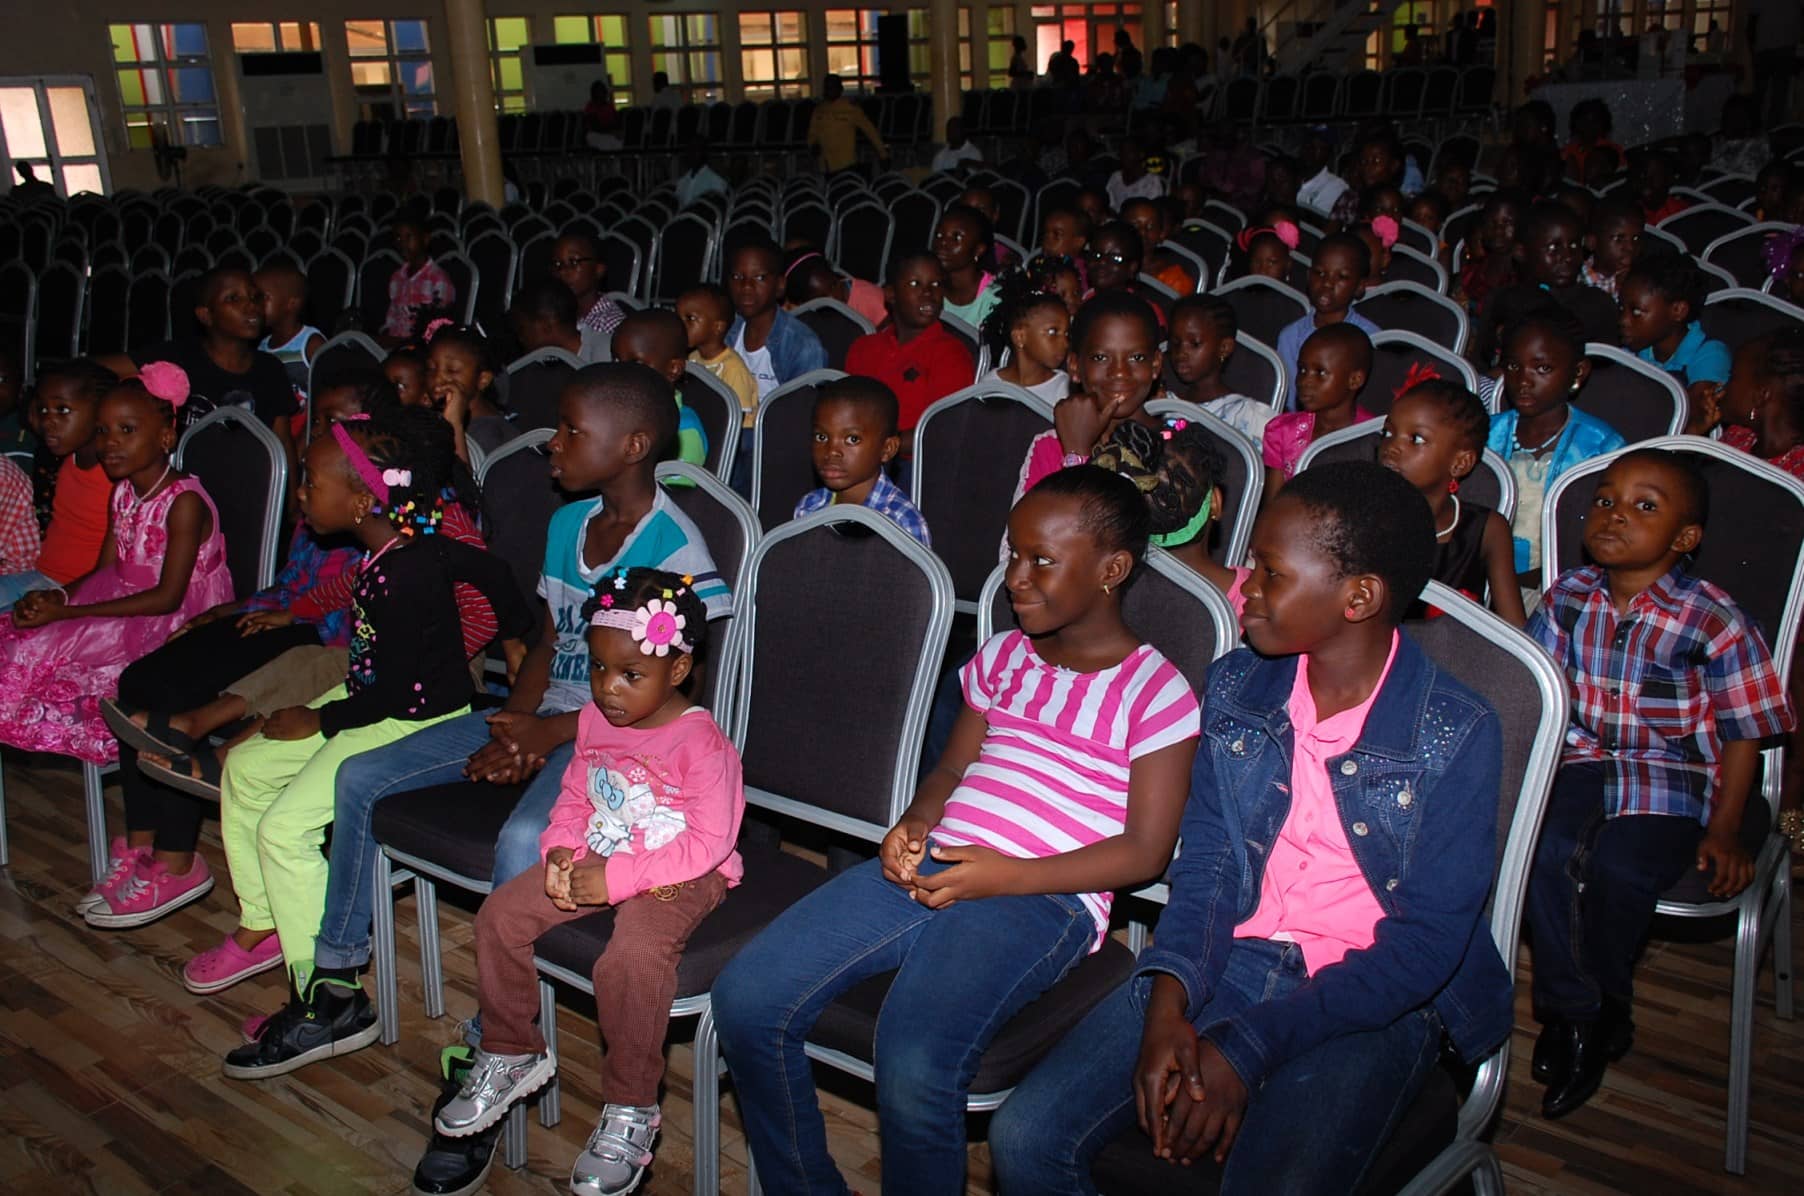 Cross-section of children participants at the funfair